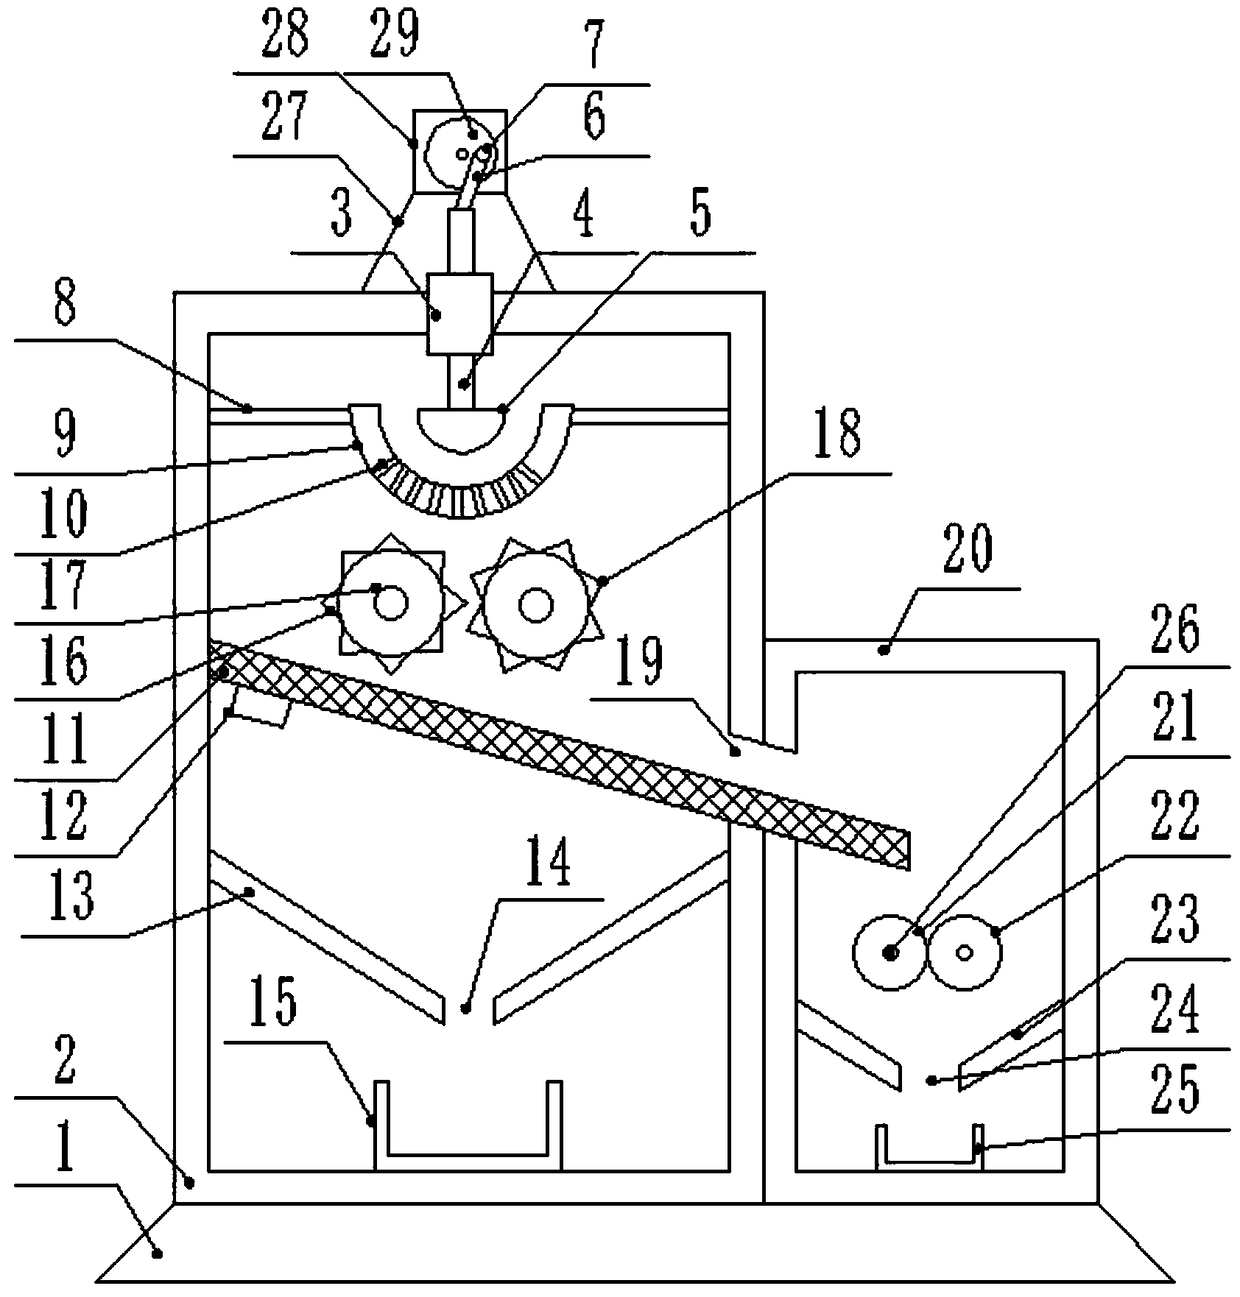 Automatic control crushing and grinding device with crankshaft and slider for salt production